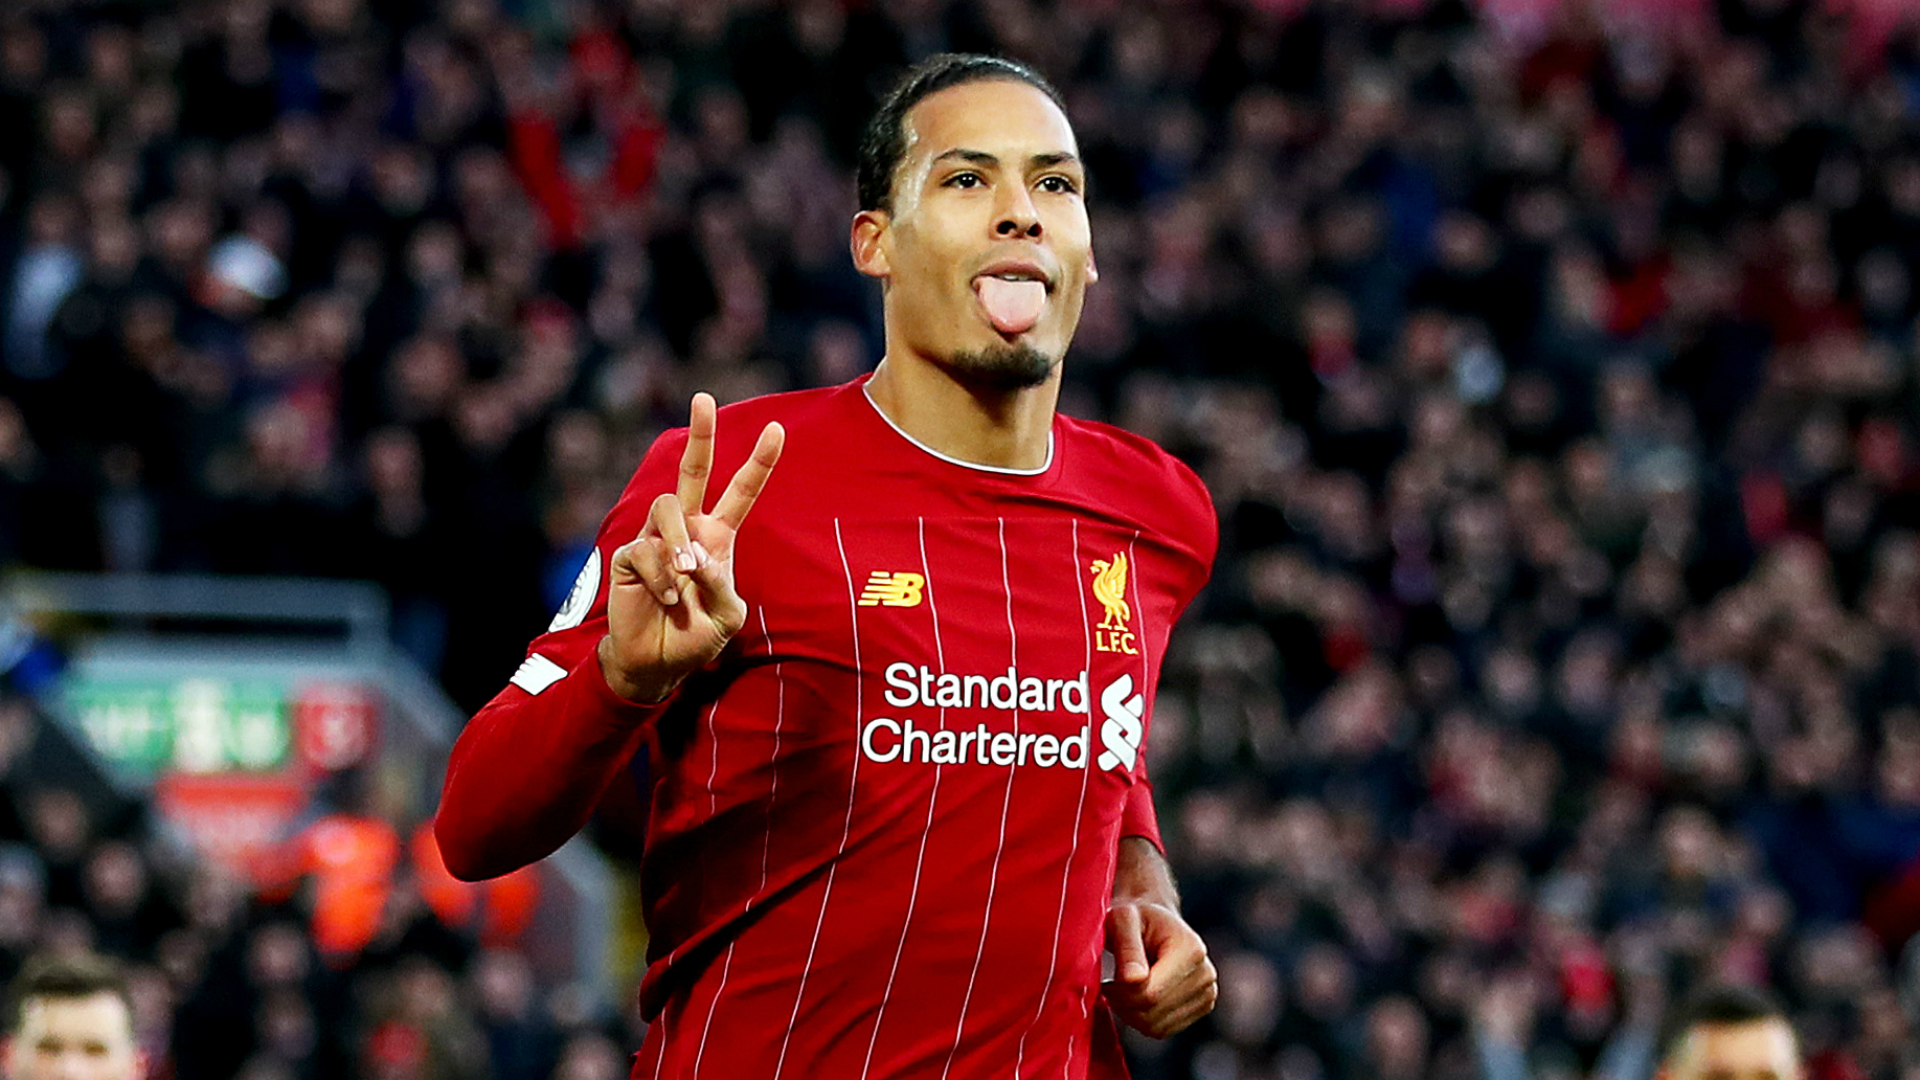 Liverpool star Virgil van Dijk warned his team there was still a long way to go in the Premier League.